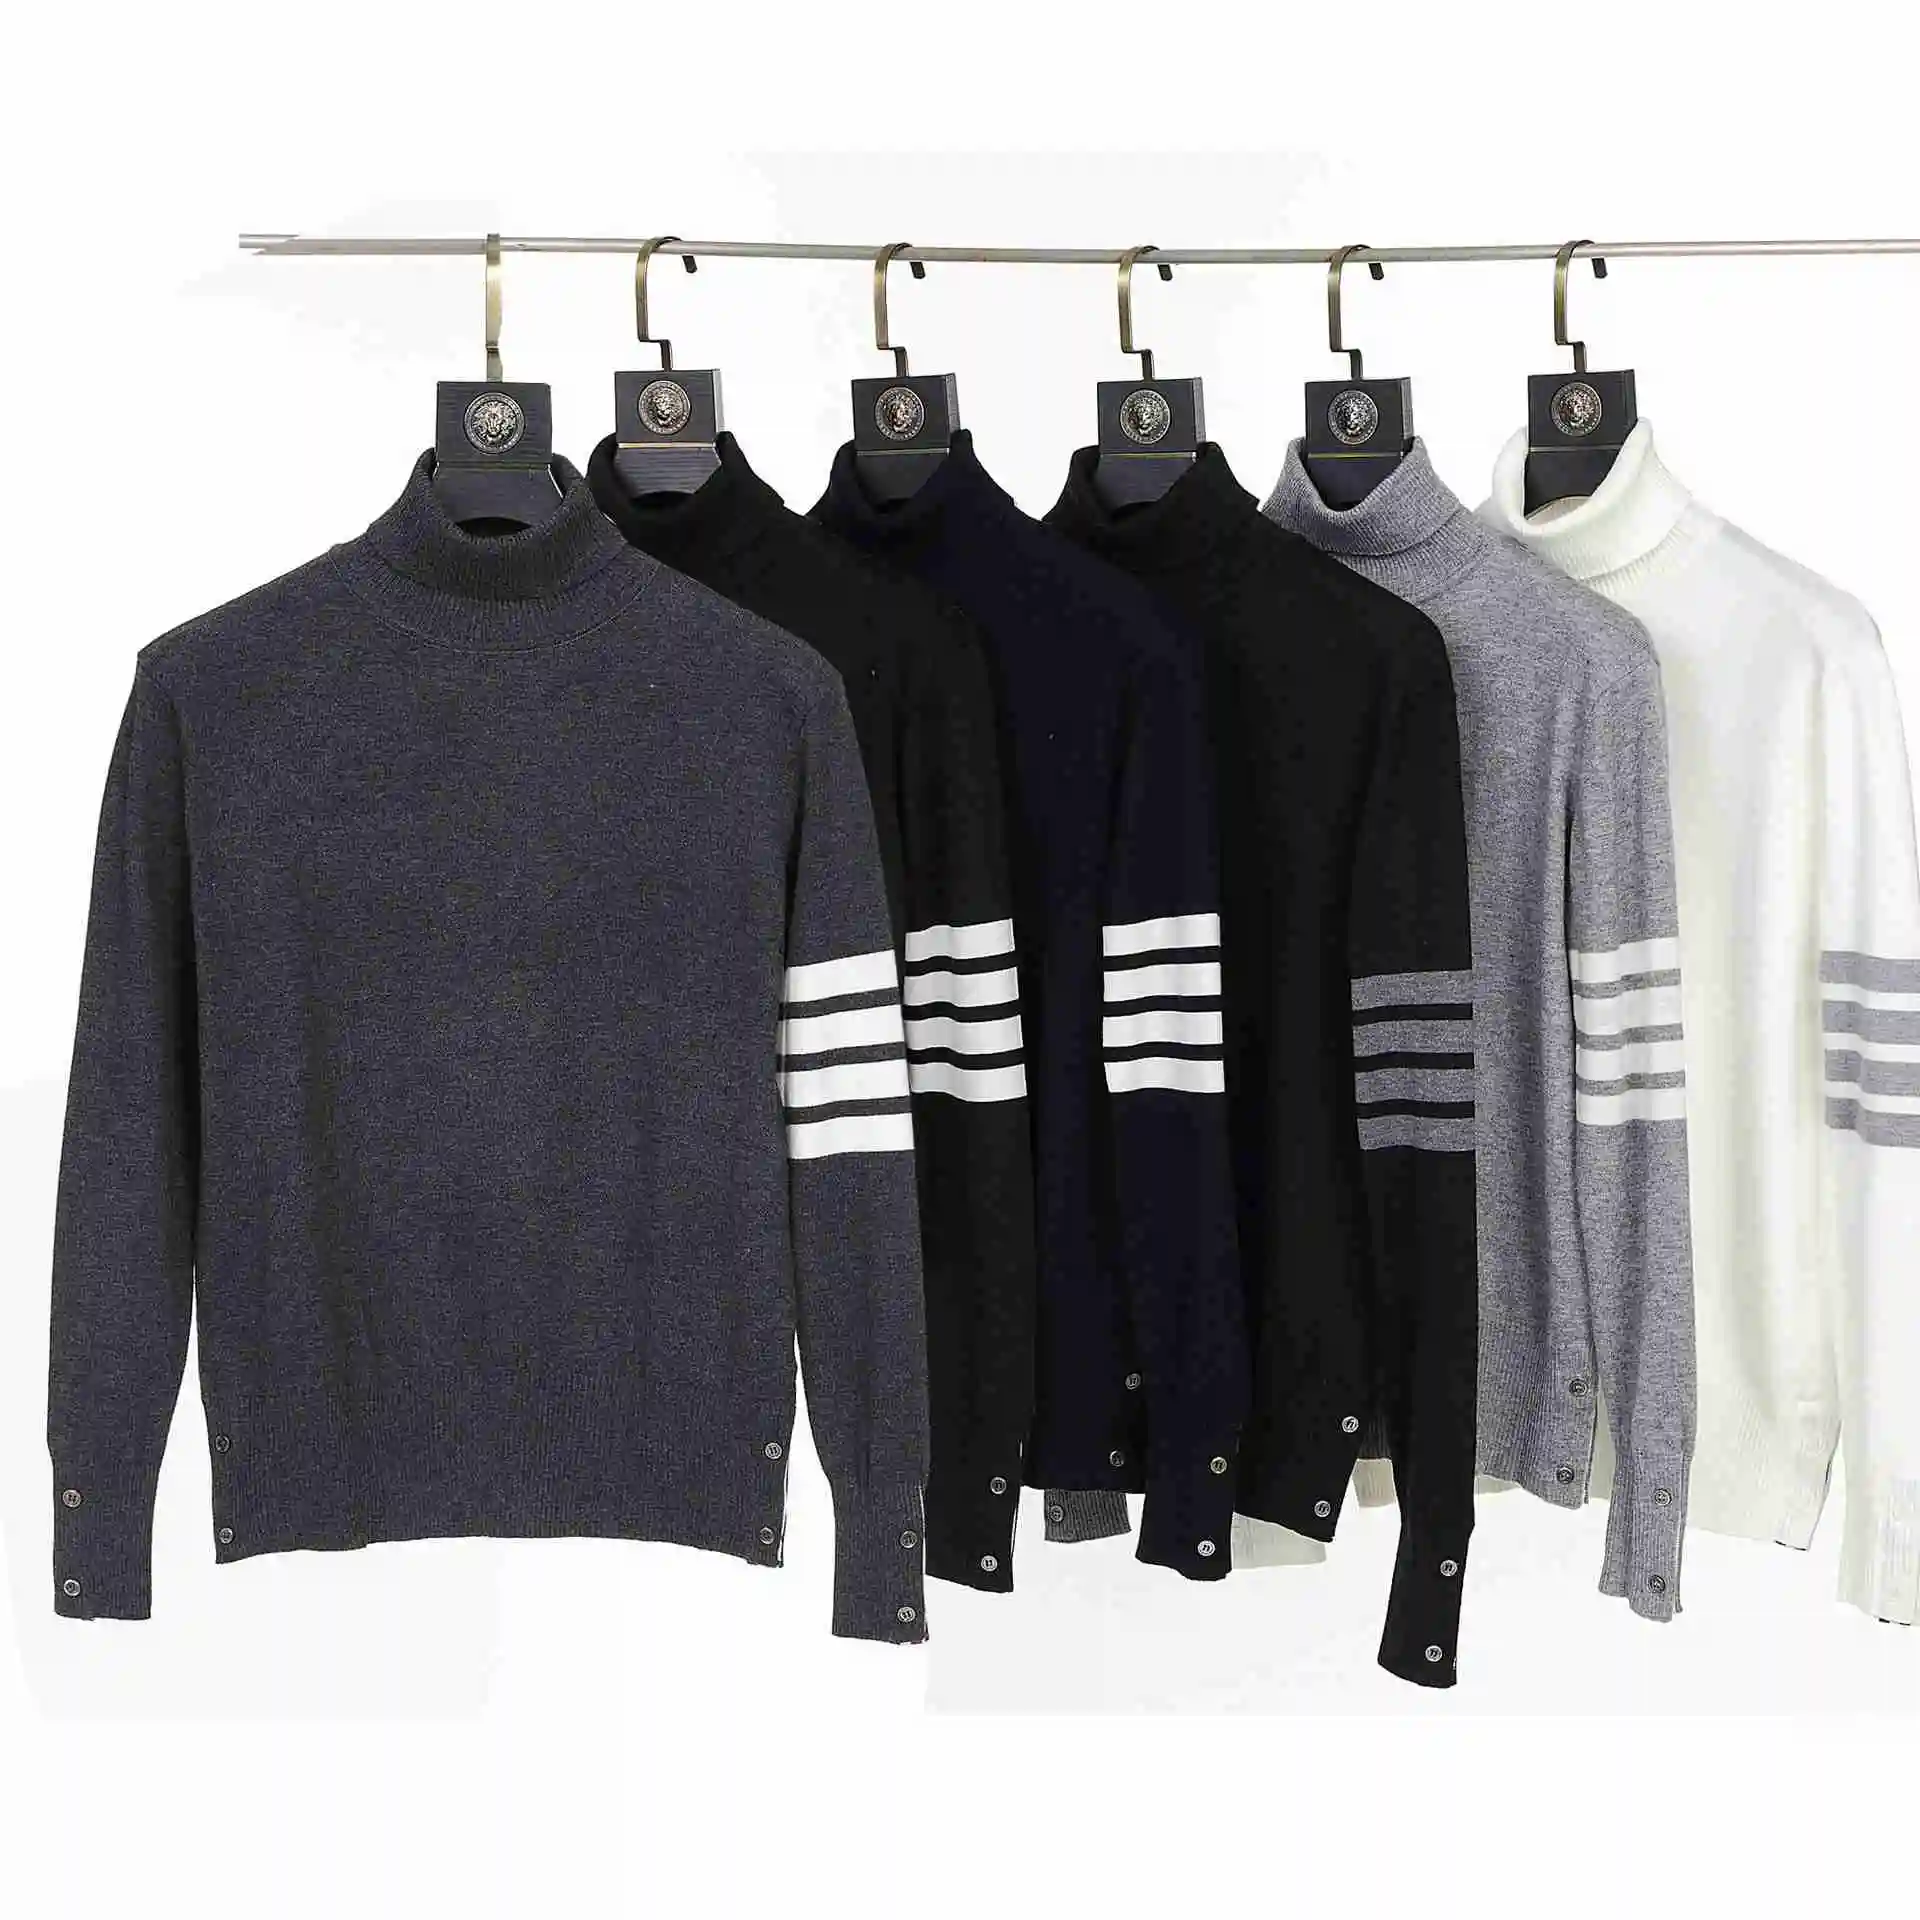 Korean Winter Men Sweater Casual Turtleneck Knitted Long Sleeve Pullover Striped Cardigan Wool High Quality Couple Wear